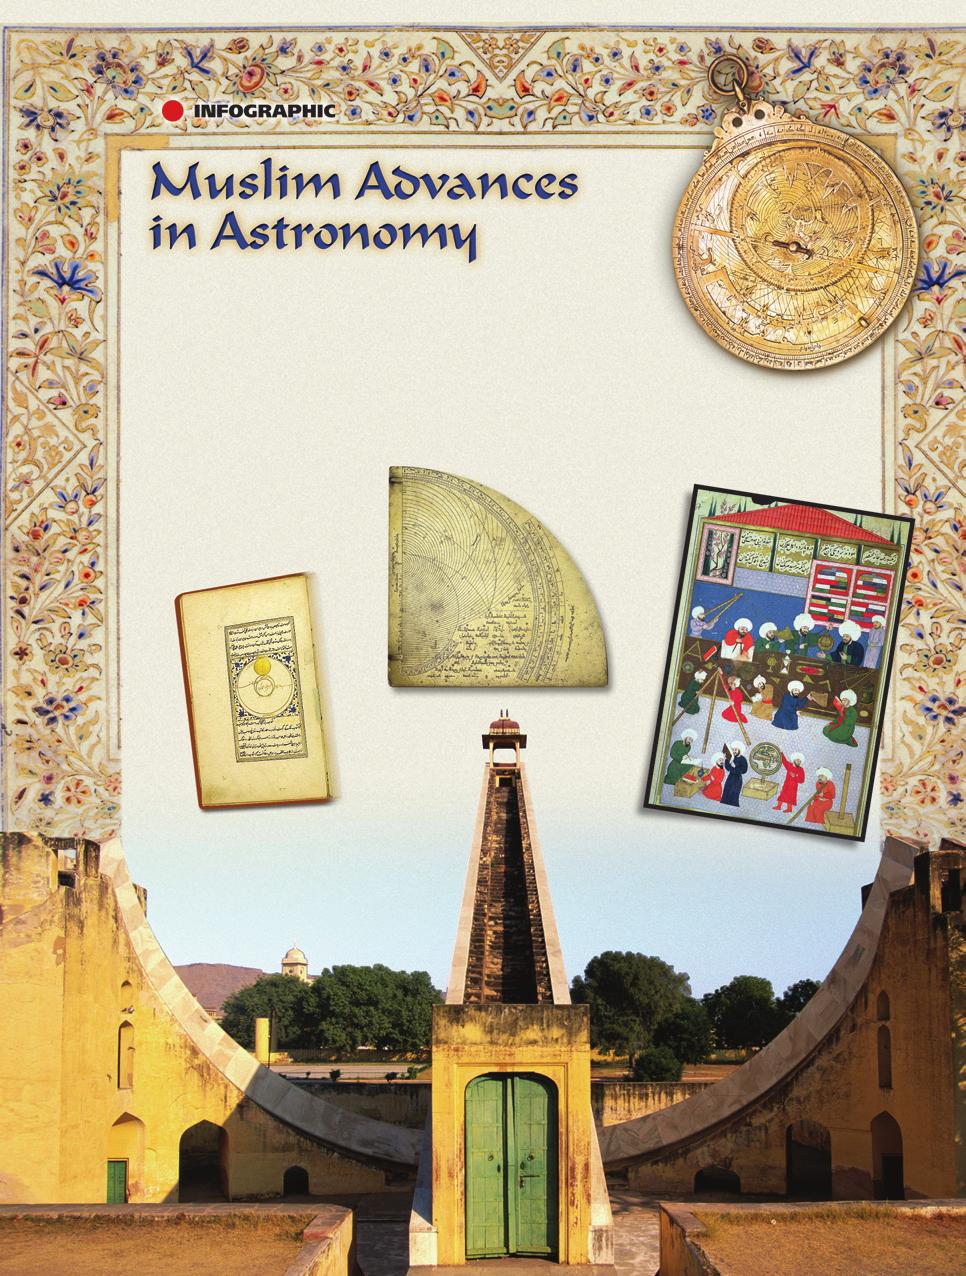 Page 321 During the Muslim Golden Age, scientists and mathematicians in Muslim regions made great advances in the field of astronomy.